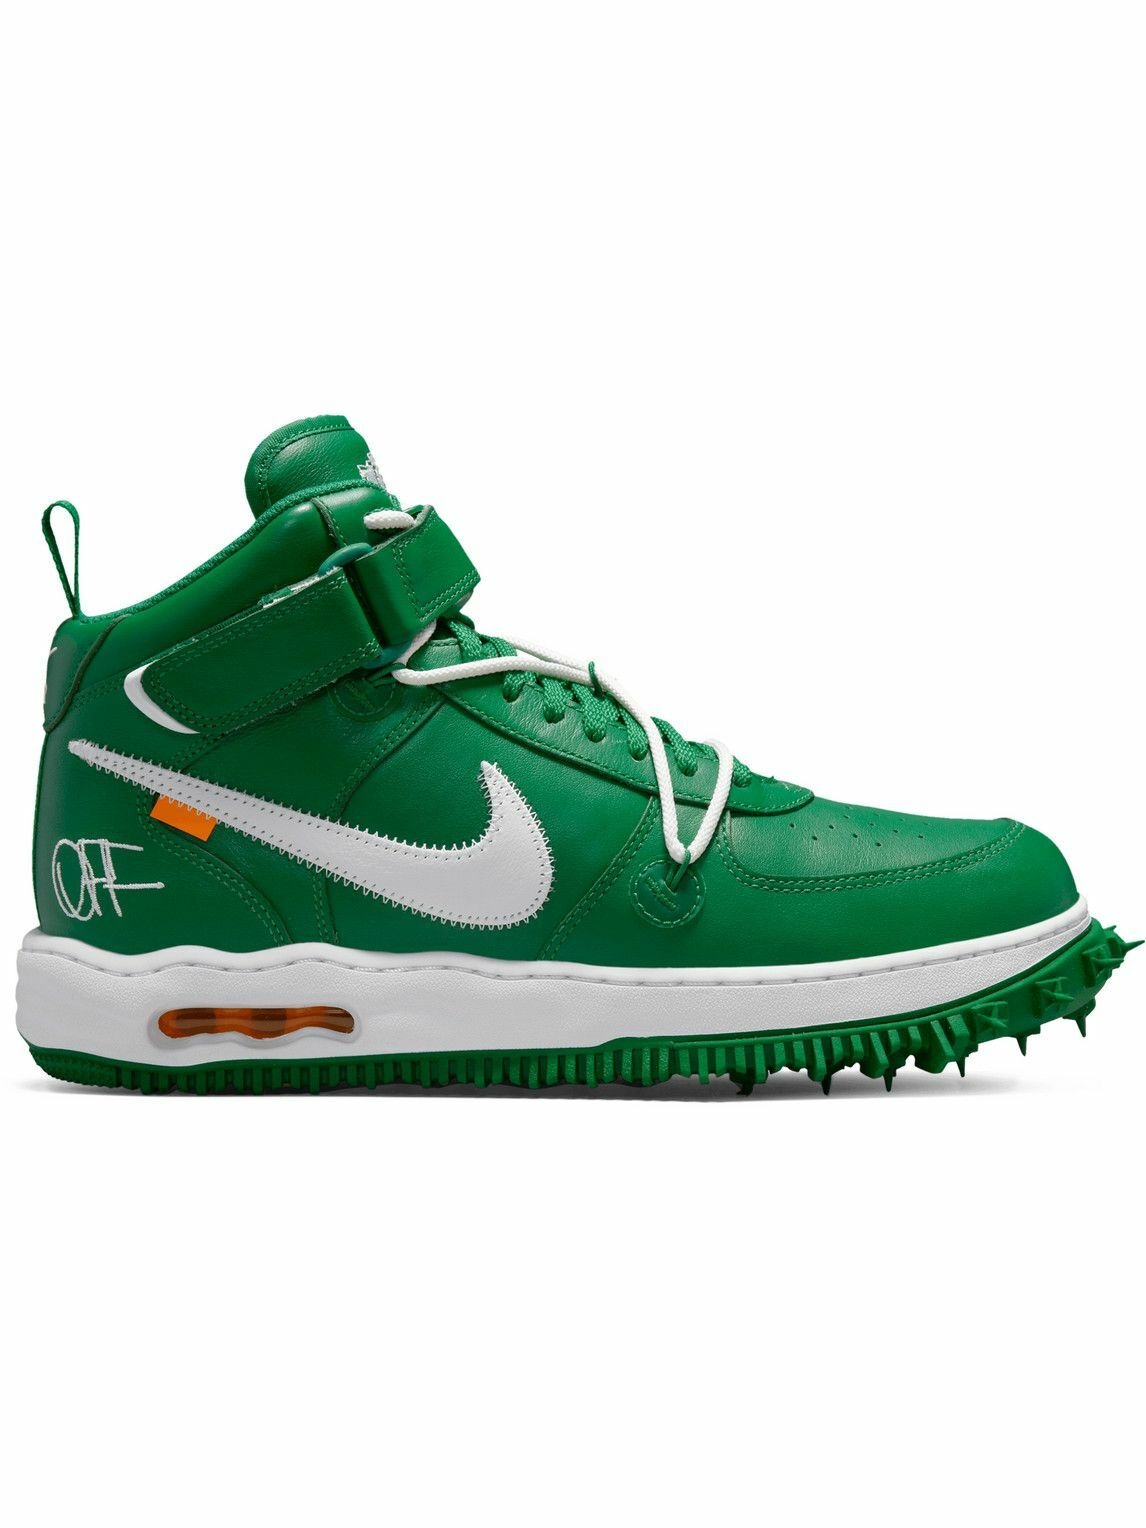 Nike - Off-White Air Force 1 Mid Leather Sneakers - Green Nike